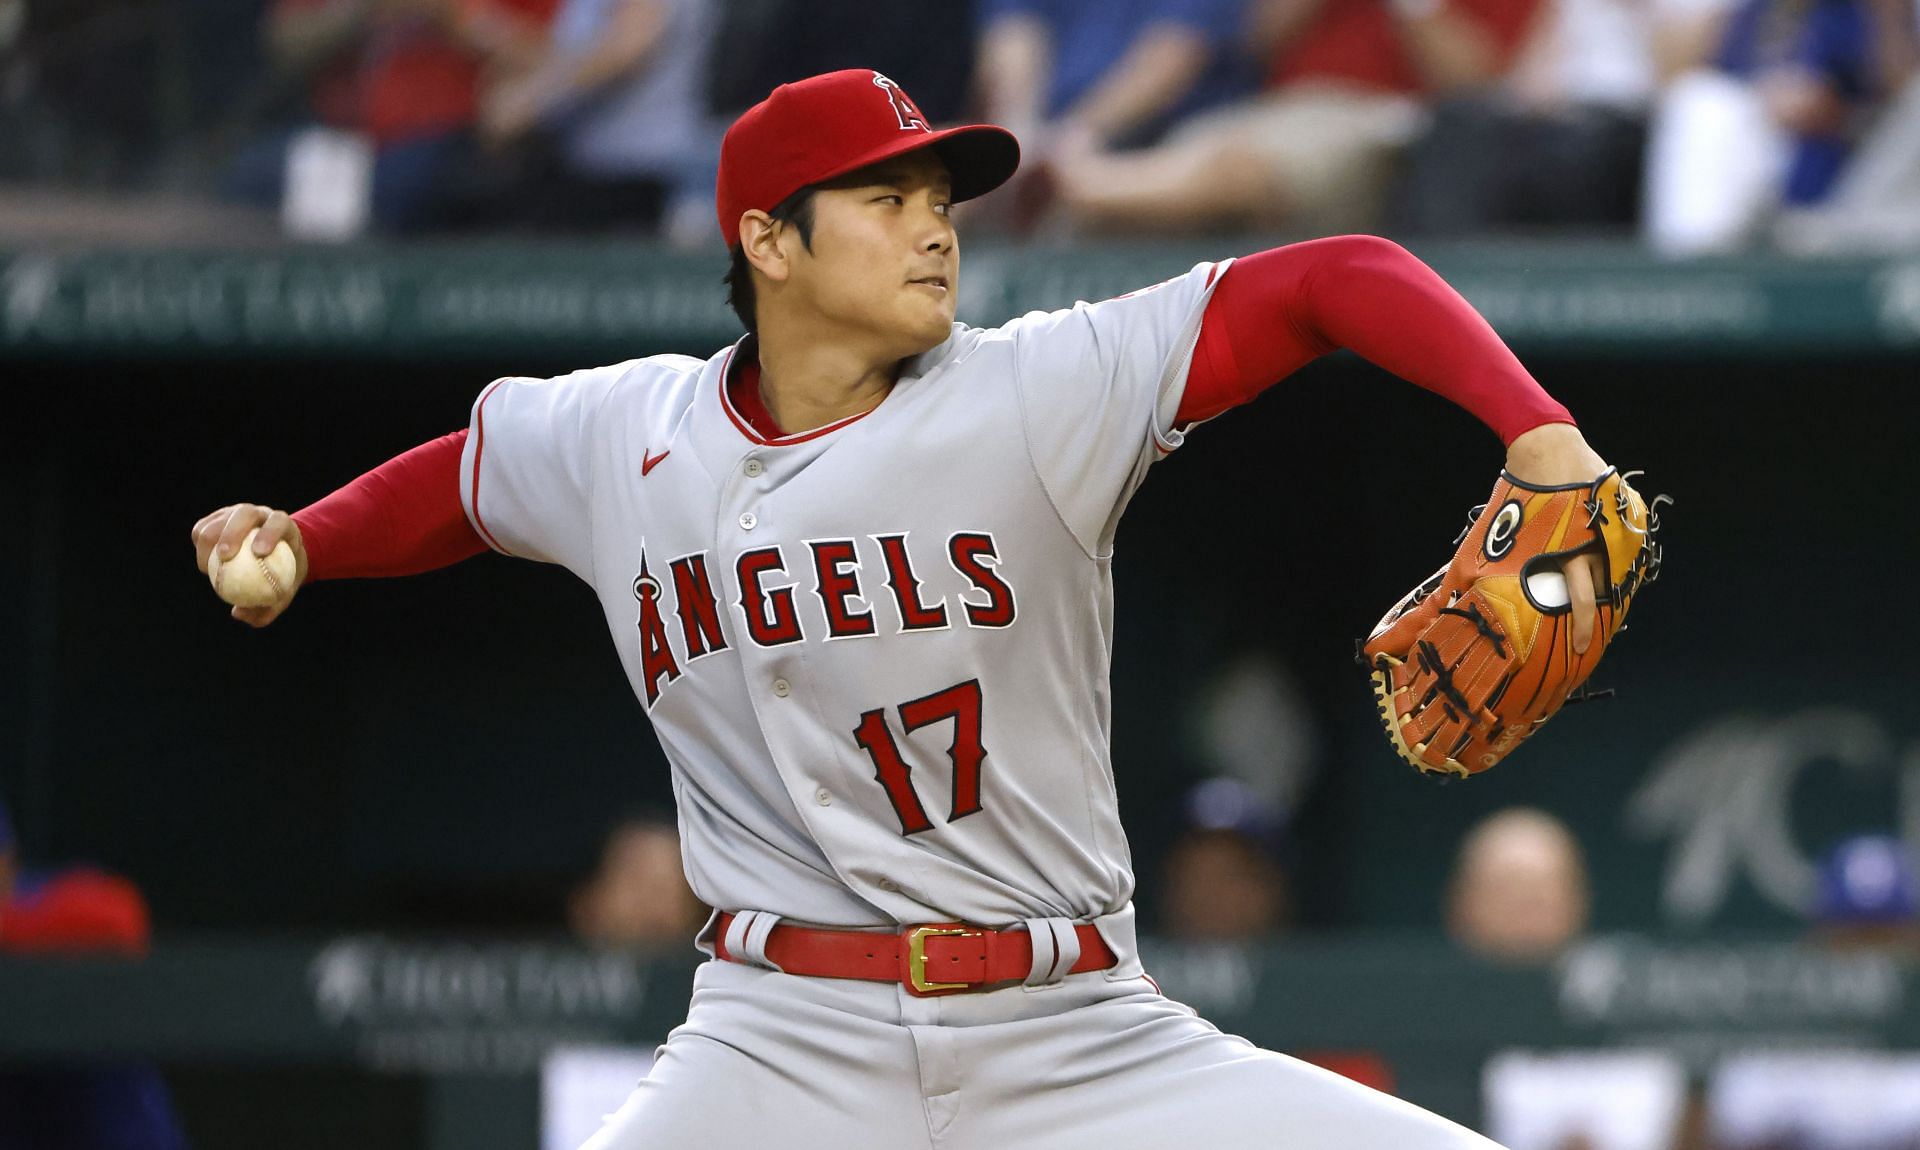 Los Angeles Angels phenom Ohtani finally got himself going last night, striking out 12 Houston Astros hitters